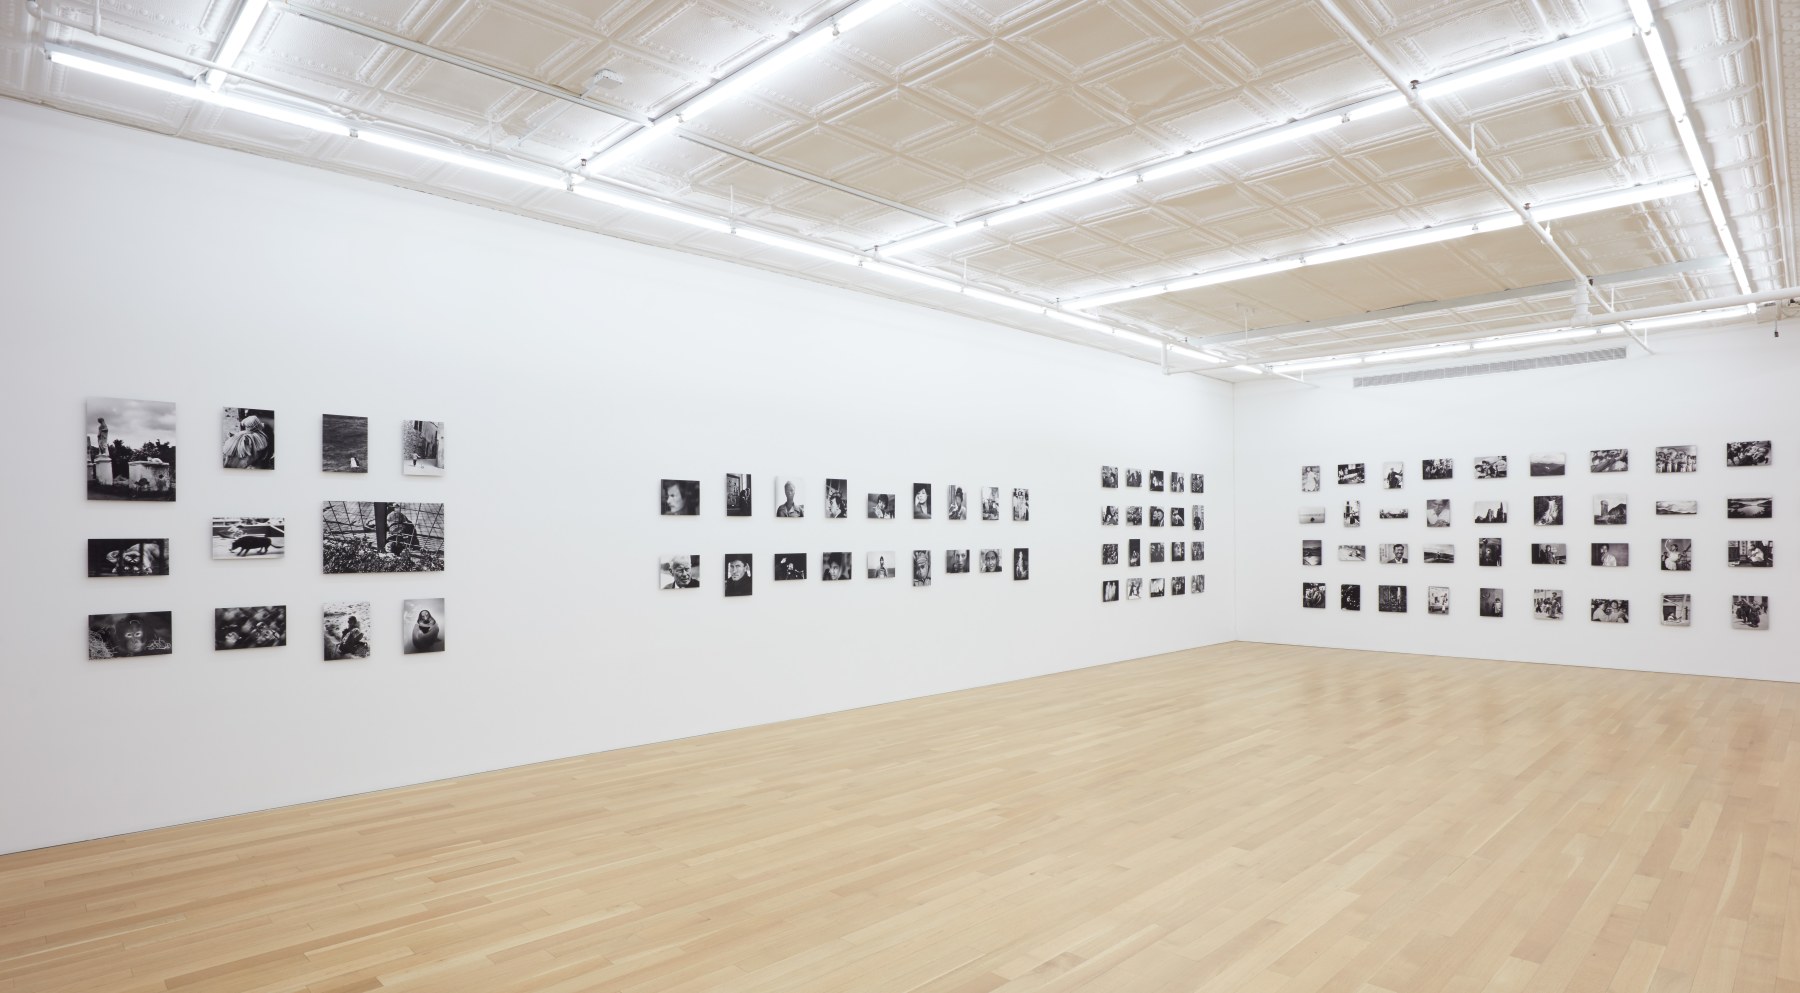 Installation view of Chris Marker:100 at Peter Blum Gallery, New York, 2021.